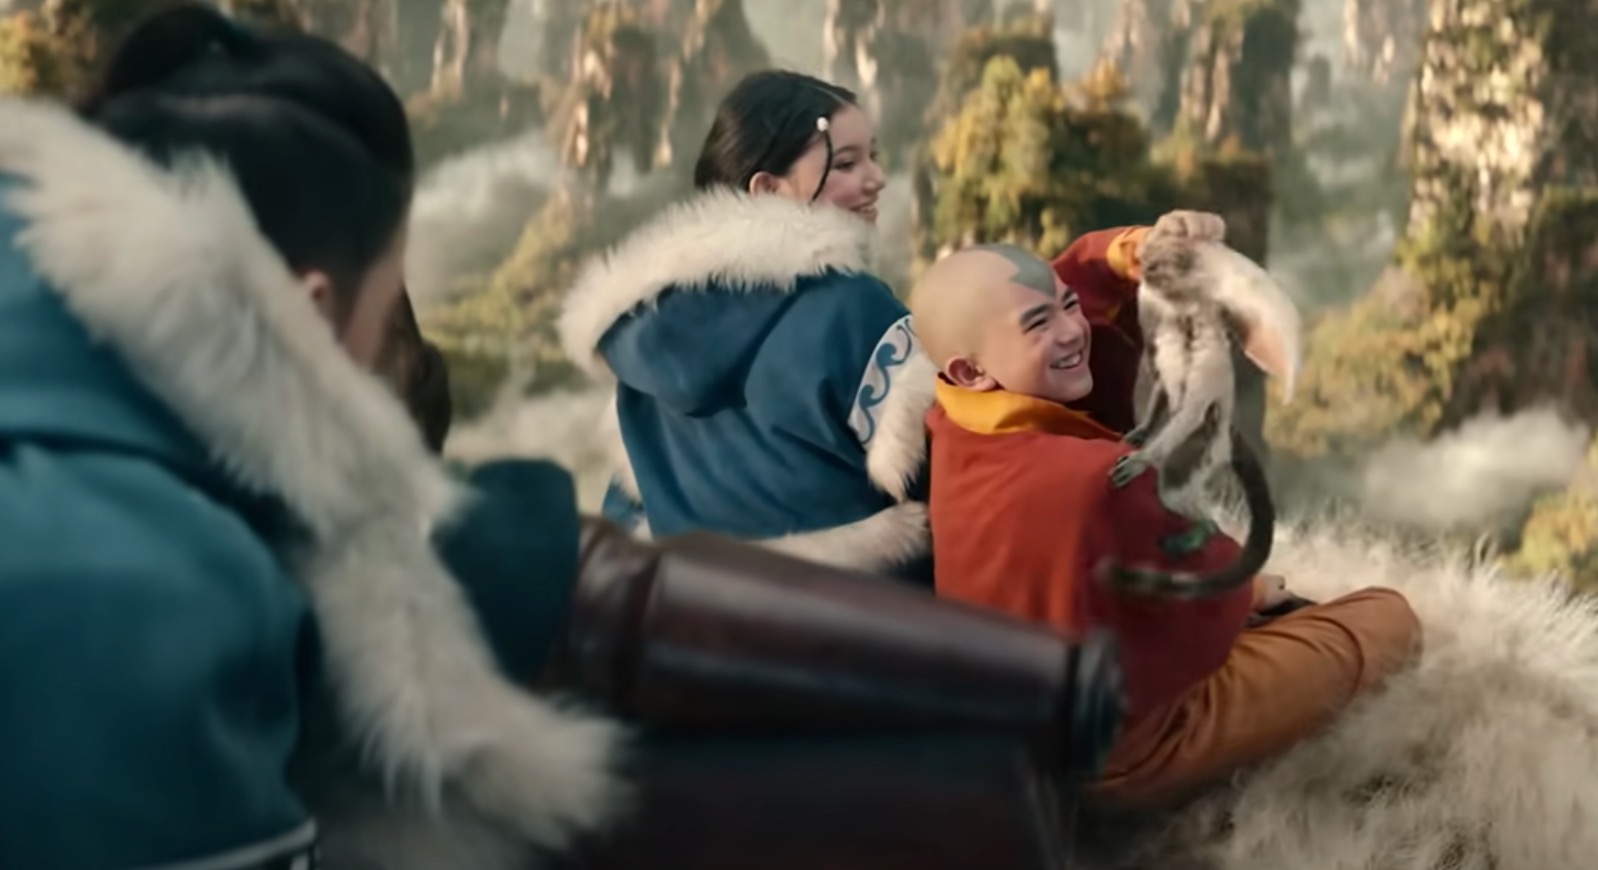 Aang Avatar the Last Airbender live action